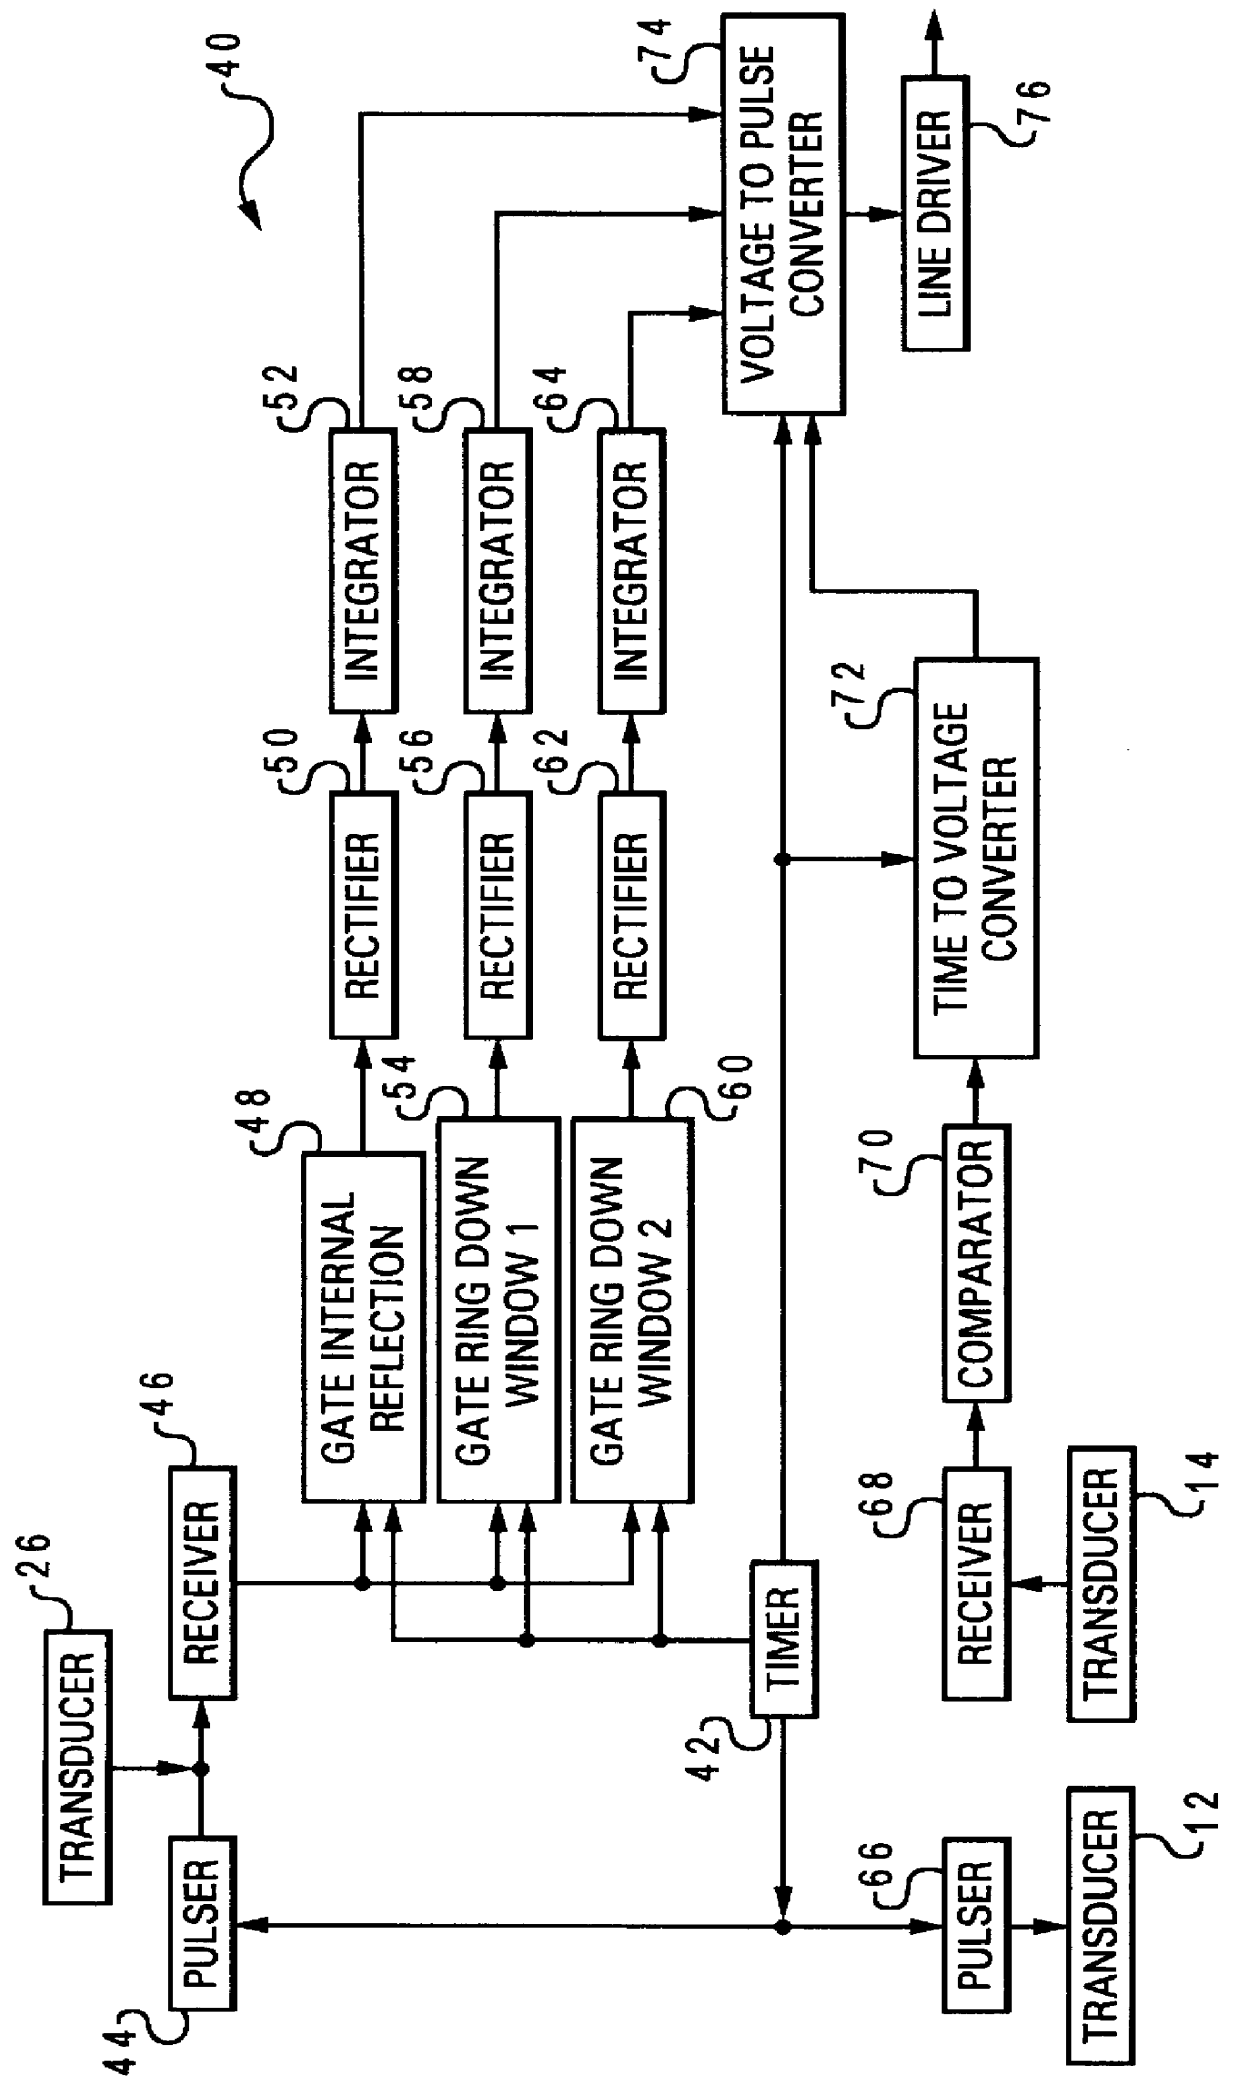 Method and apparatus for acoustic logging of fluid density and wet cement plugs in boreholes